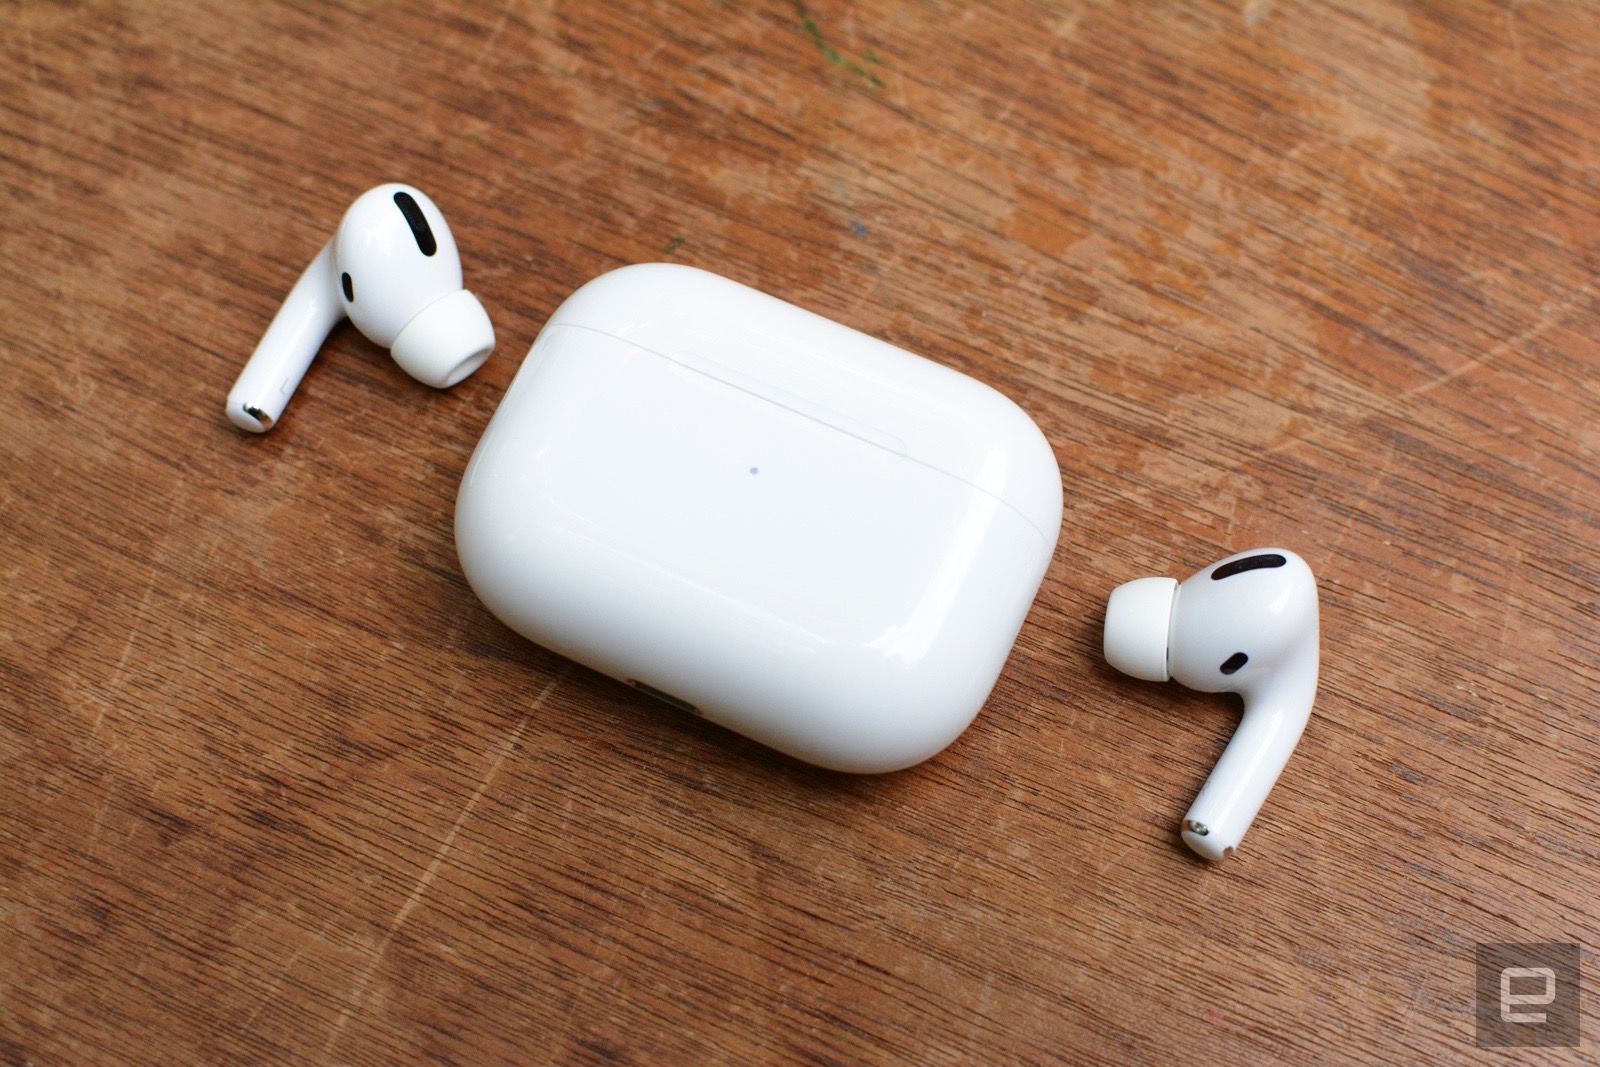 Apple's AirPods Pro drop to $175, plus the rest of the week's best tech